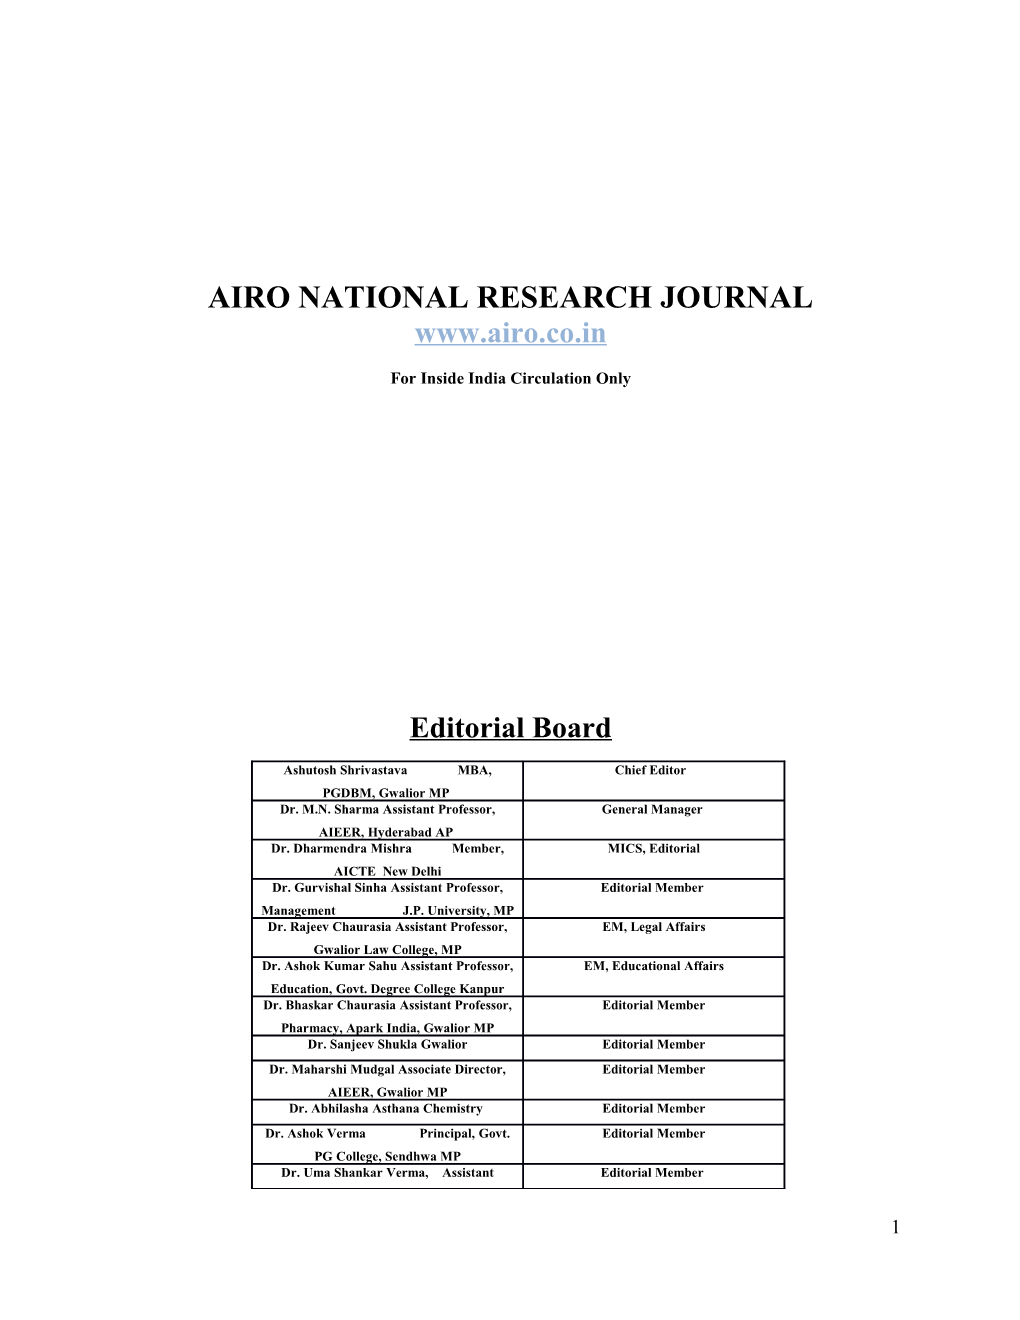 Airo National Research Journal